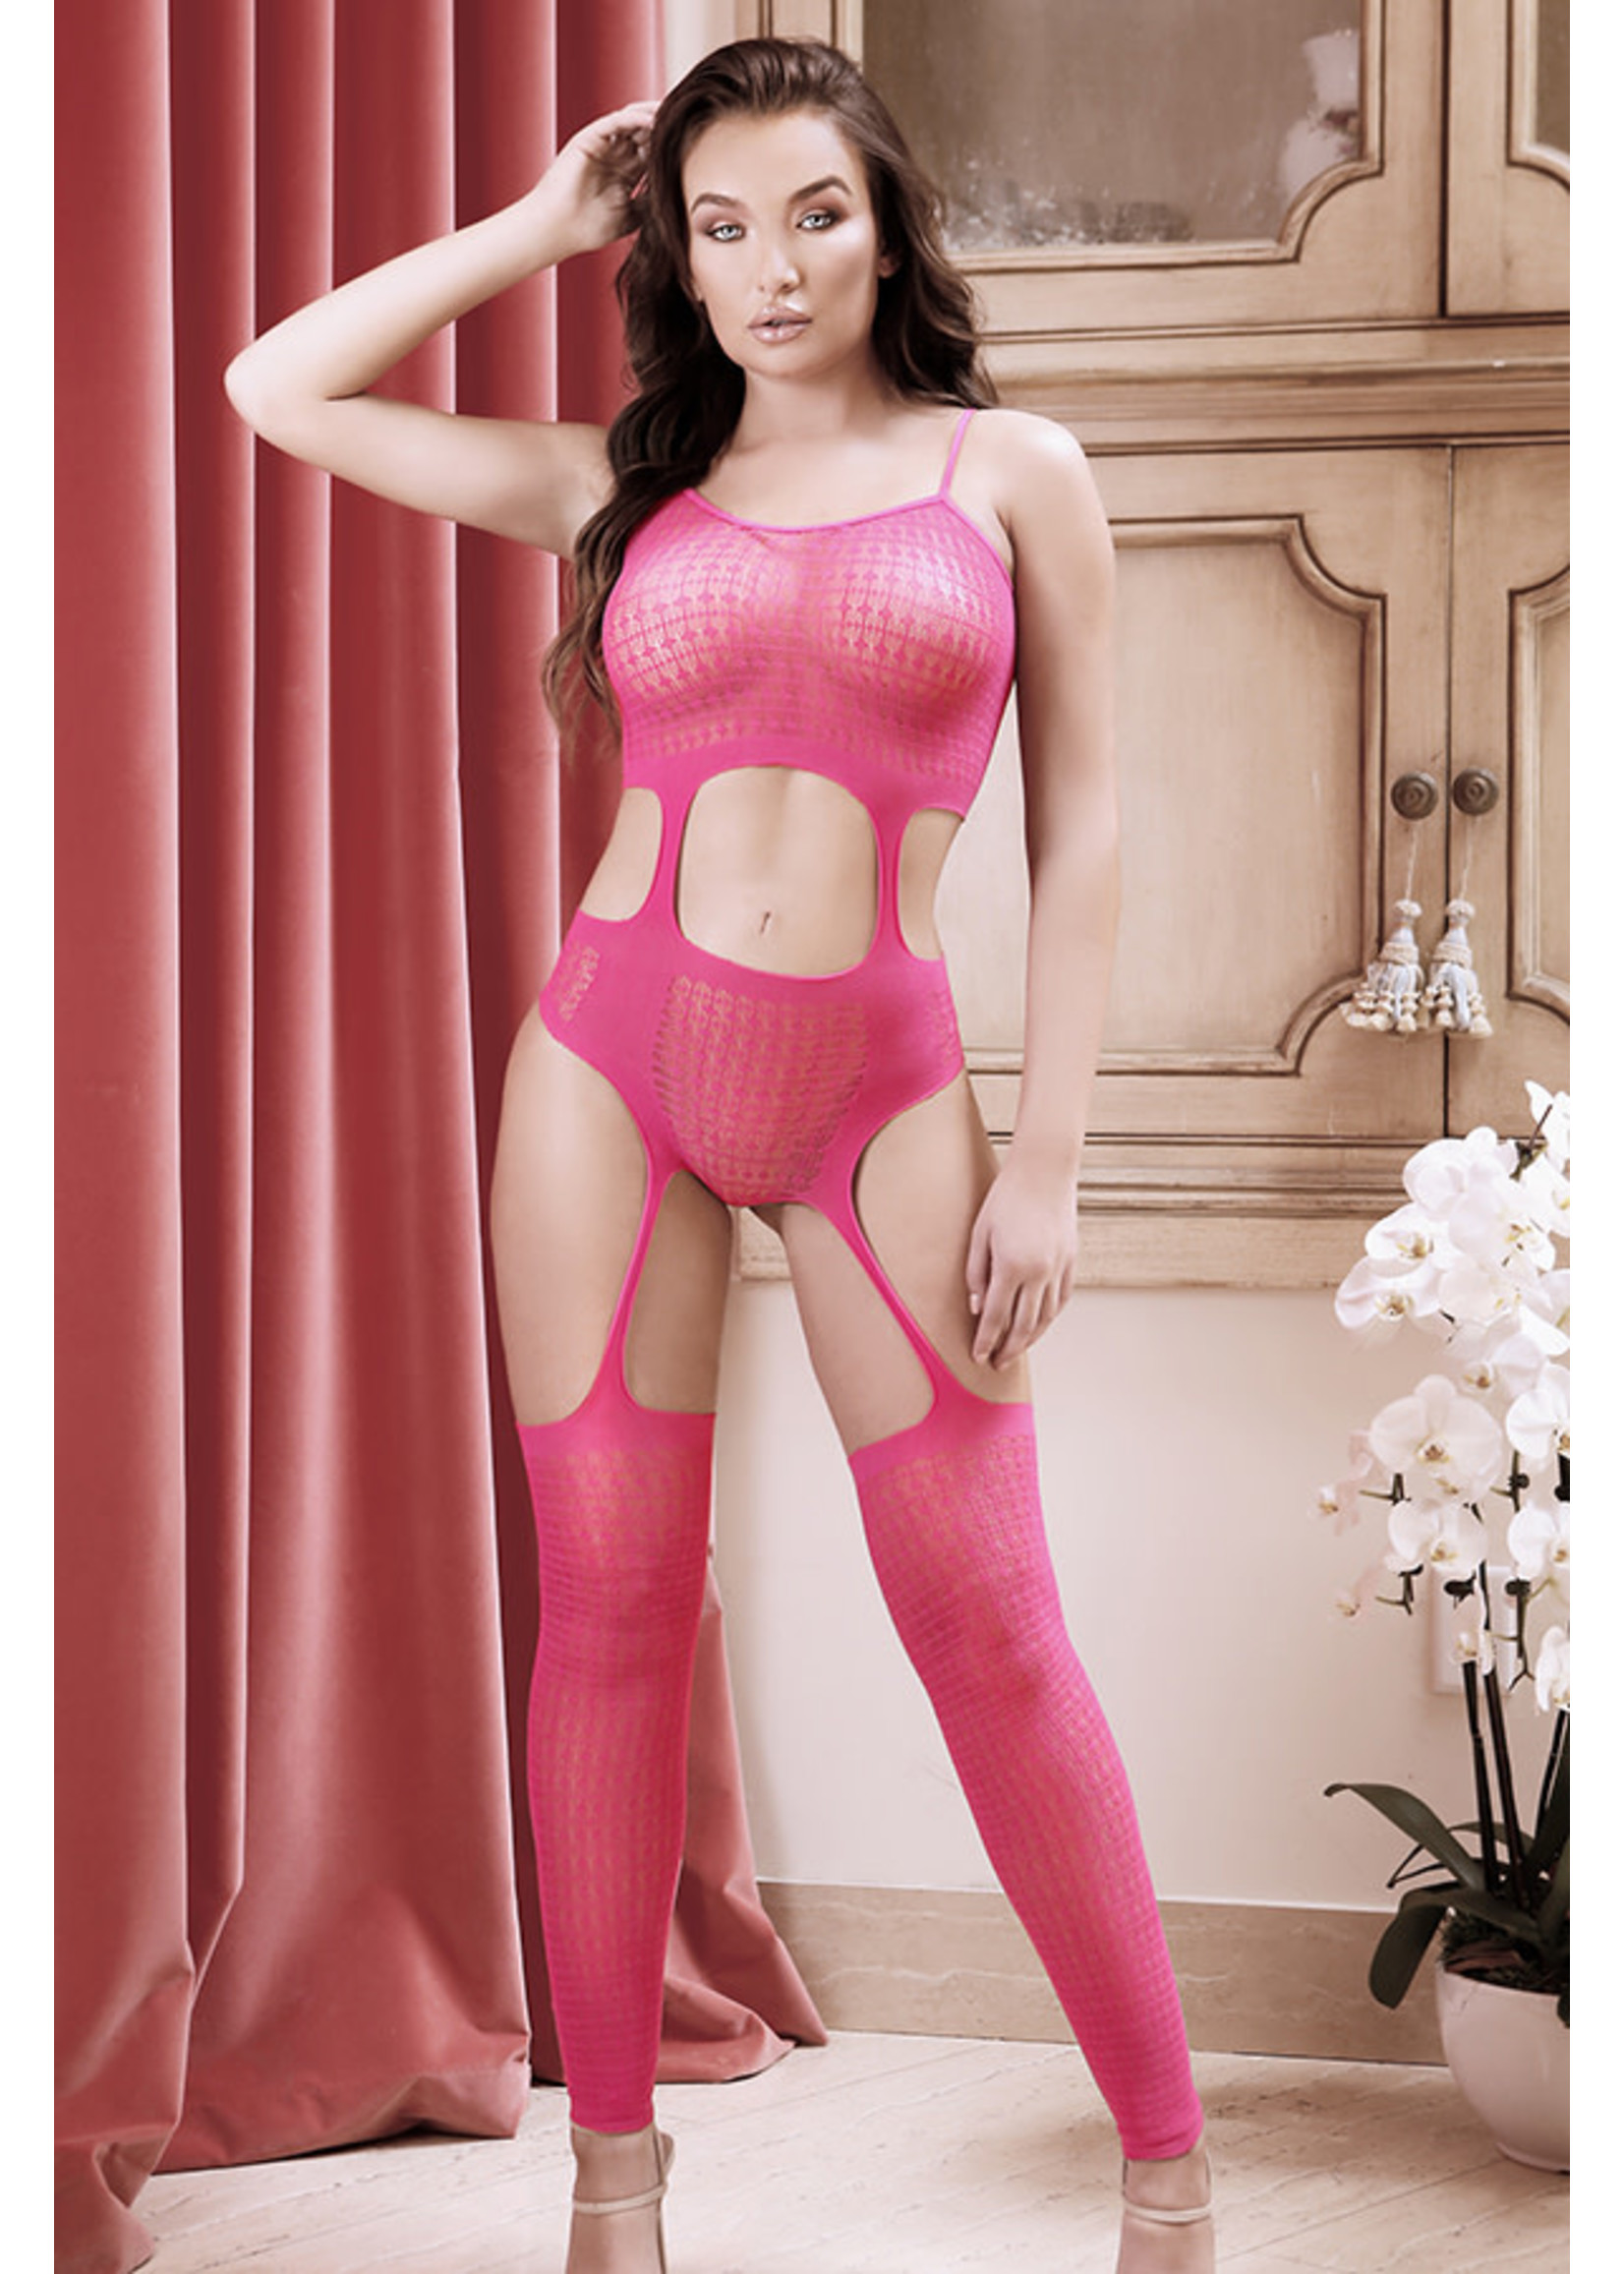 Sheer Fantasy Afterglow Cutout Teddy with Attached Footless Stockings